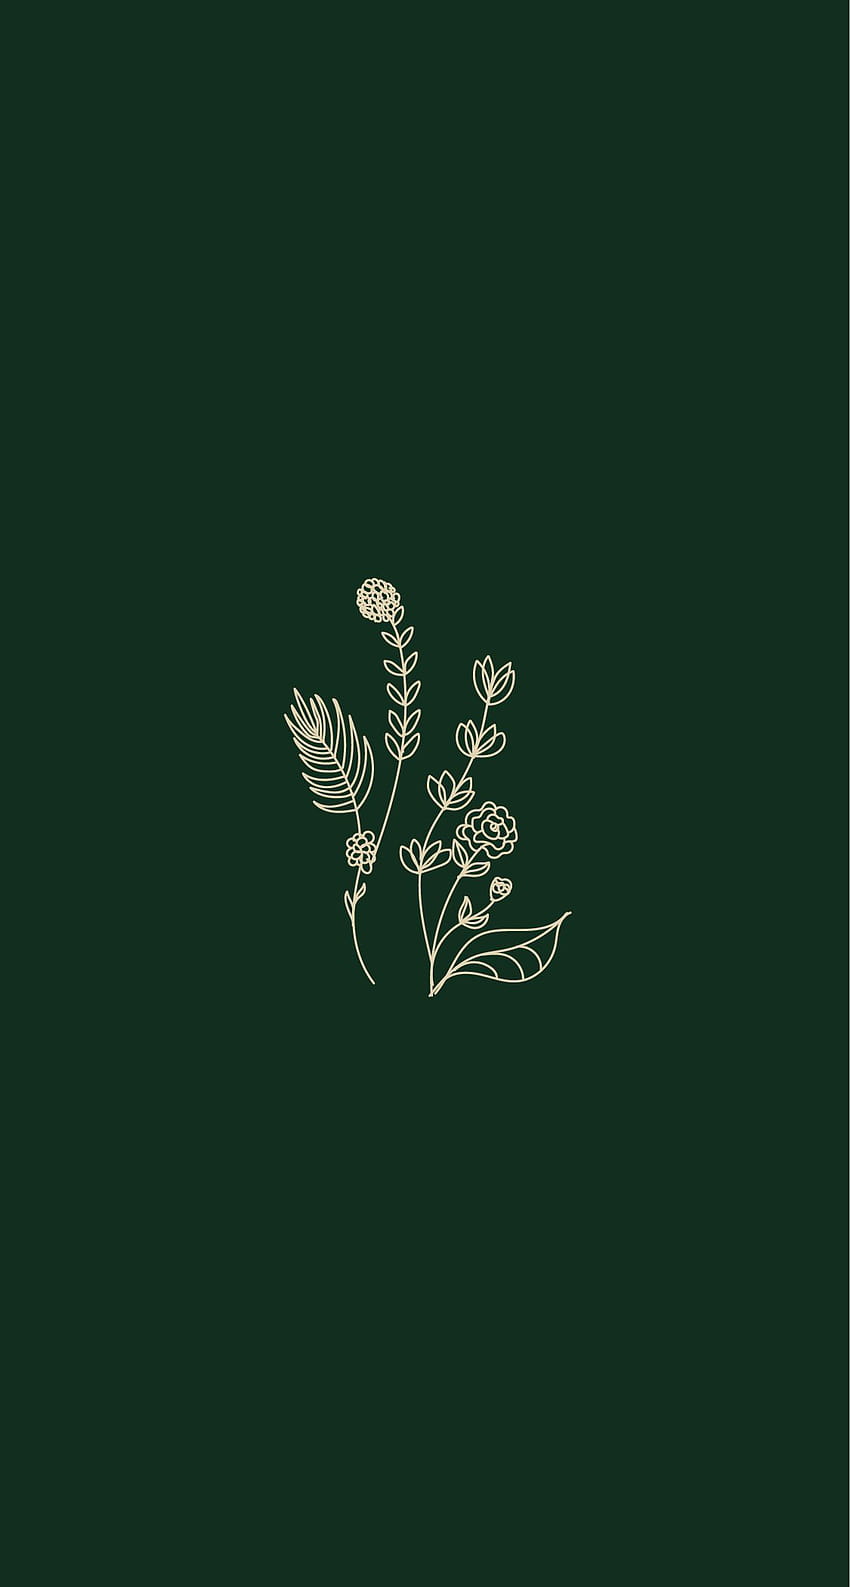 140 Phone Aesthetic ideas in 2021, olive green aesthetic HD phone wallpaper